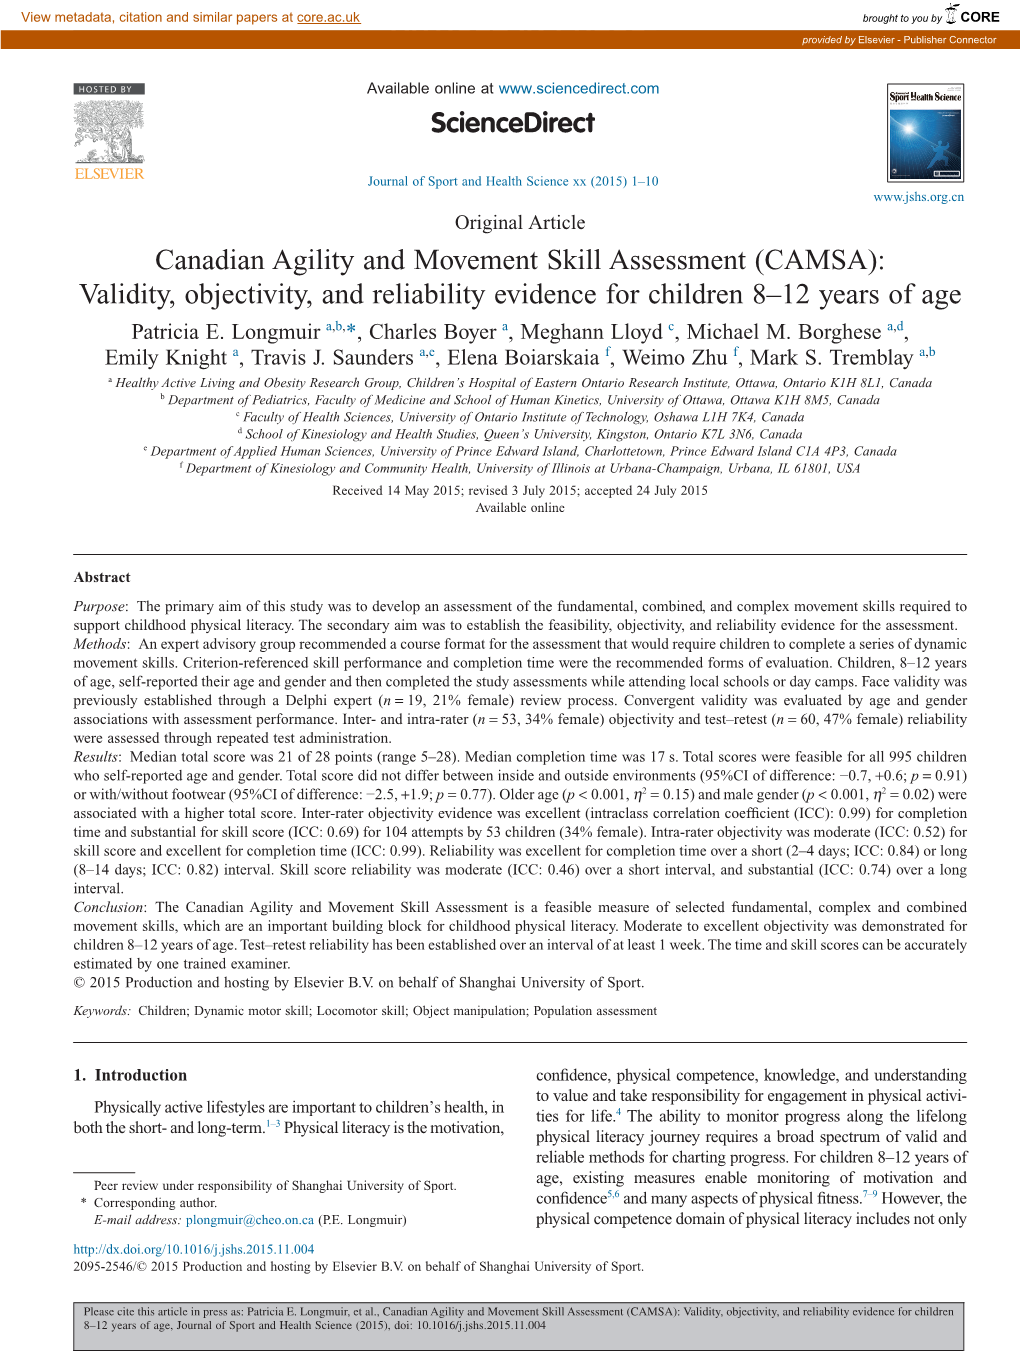 Canadian Agility and Movement Skill Assessment (CAMSA): Validity, Objectivity, and Reliability Evidence for Children 8–12 Years of Age Patricia E